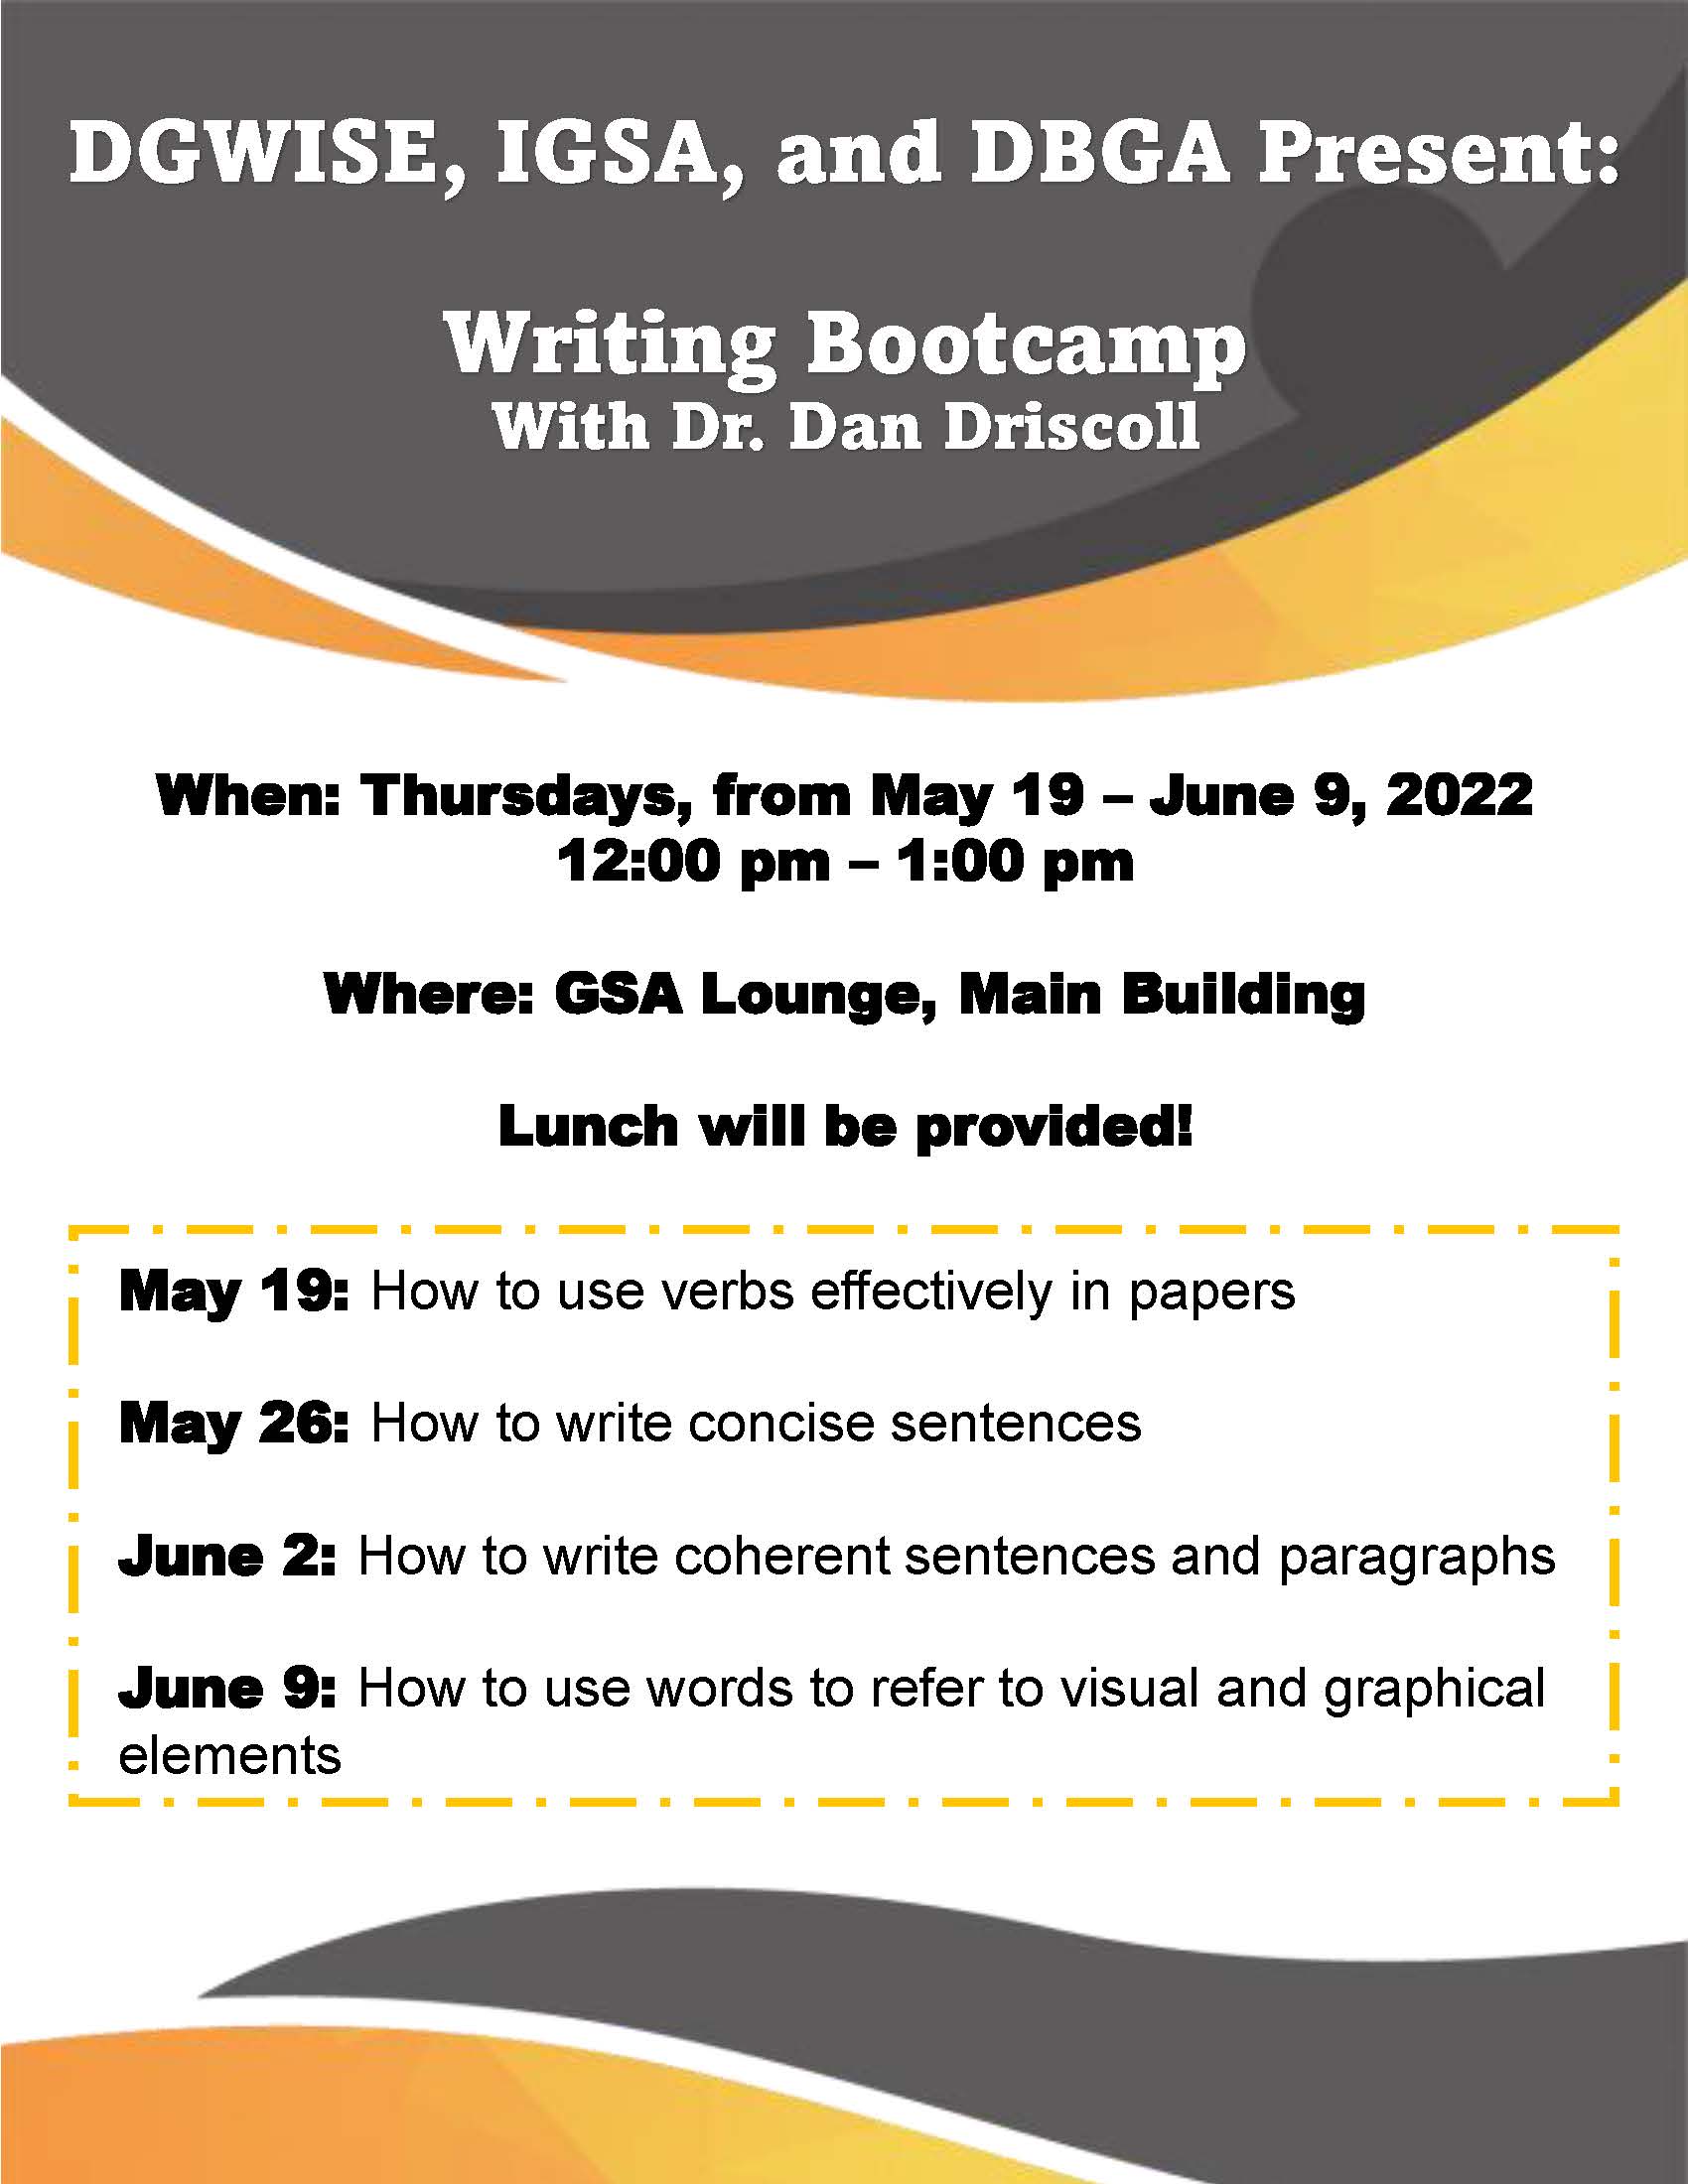 writing bootcamp hosted by student orgs Thursday from may 19 to June 9 12-1pm